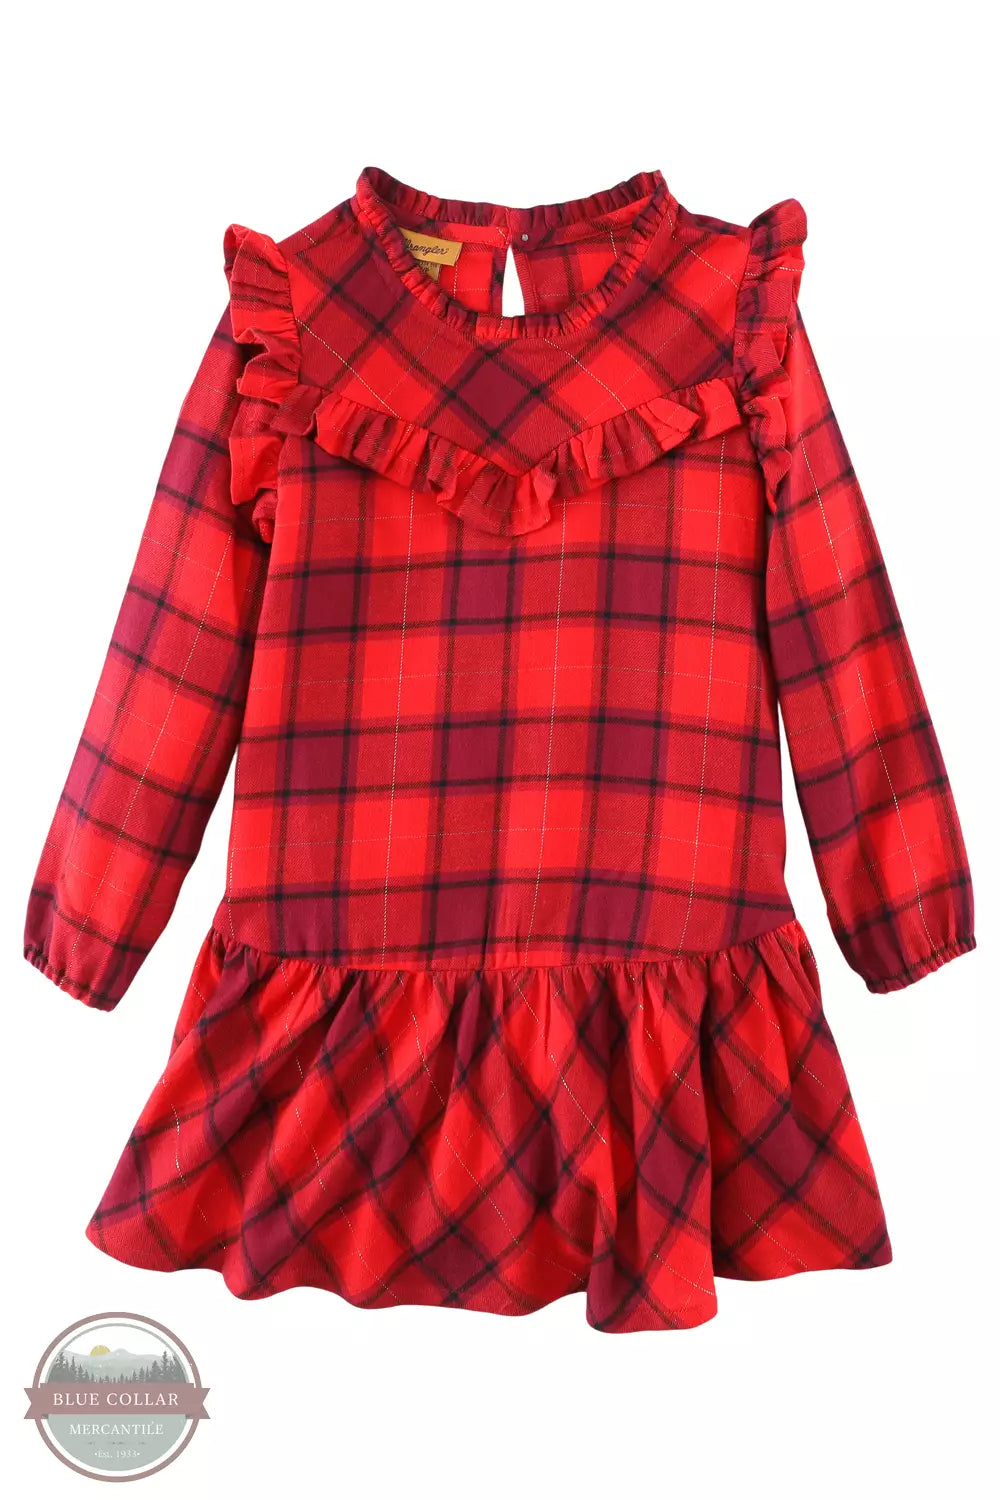 Wrangler 112338539 Long Sleeve Western Ruffle Dress in Red Plaid Front View